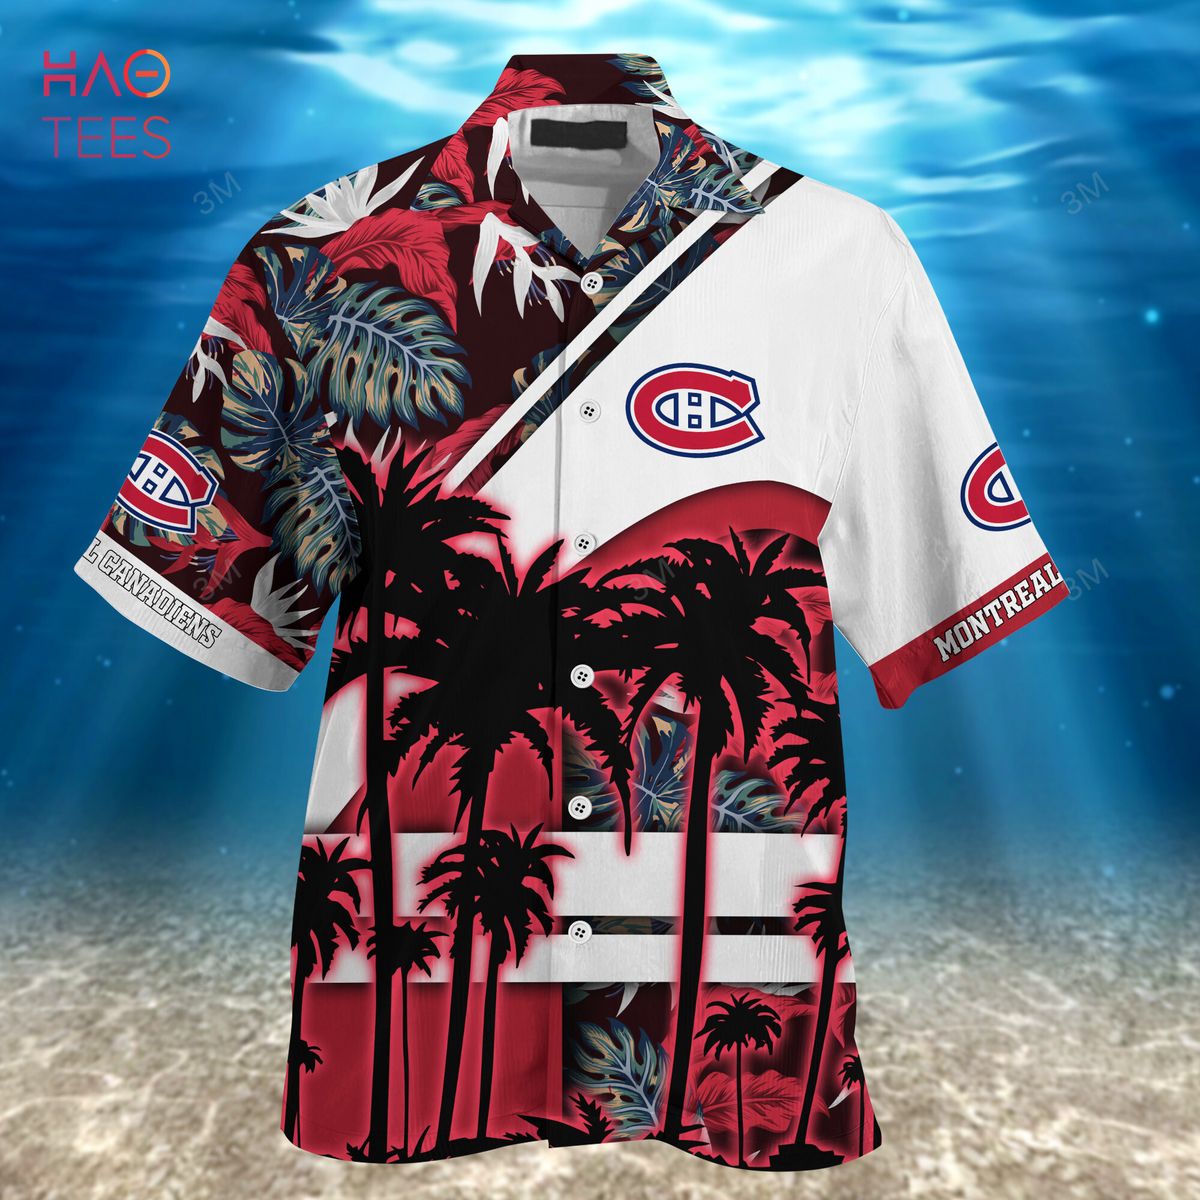 Nhl Montreal Canadiens Jersey Concepts 3D Hockey Jersey Limited